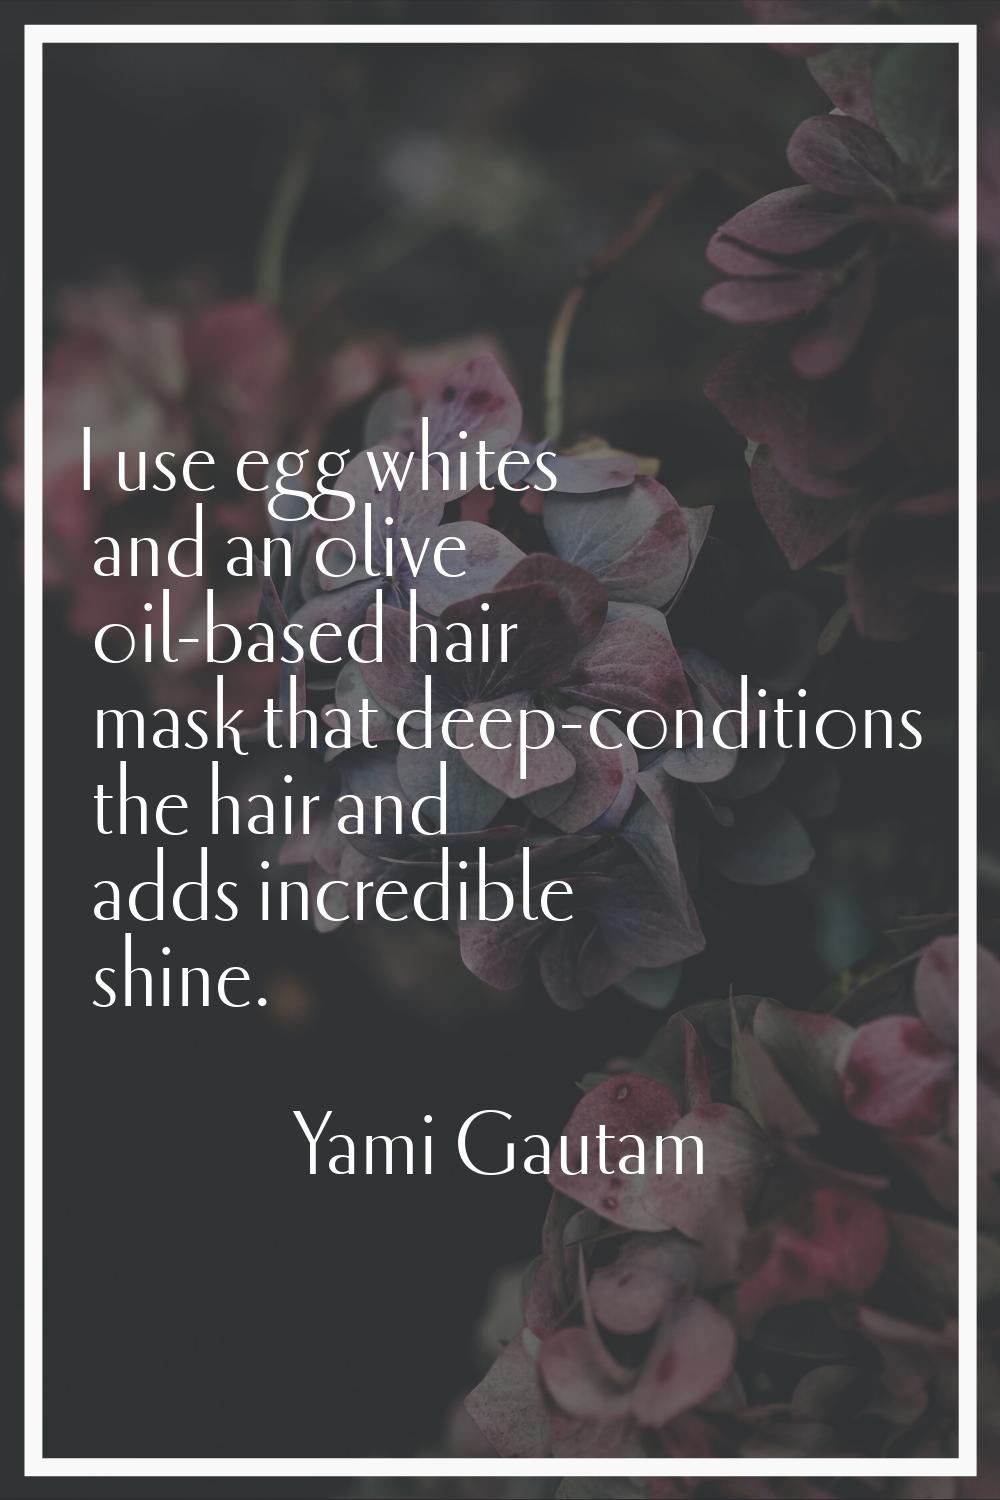 I use egg whites and an olive oil-based hair mask that deep-conditions the hair and adds incredible